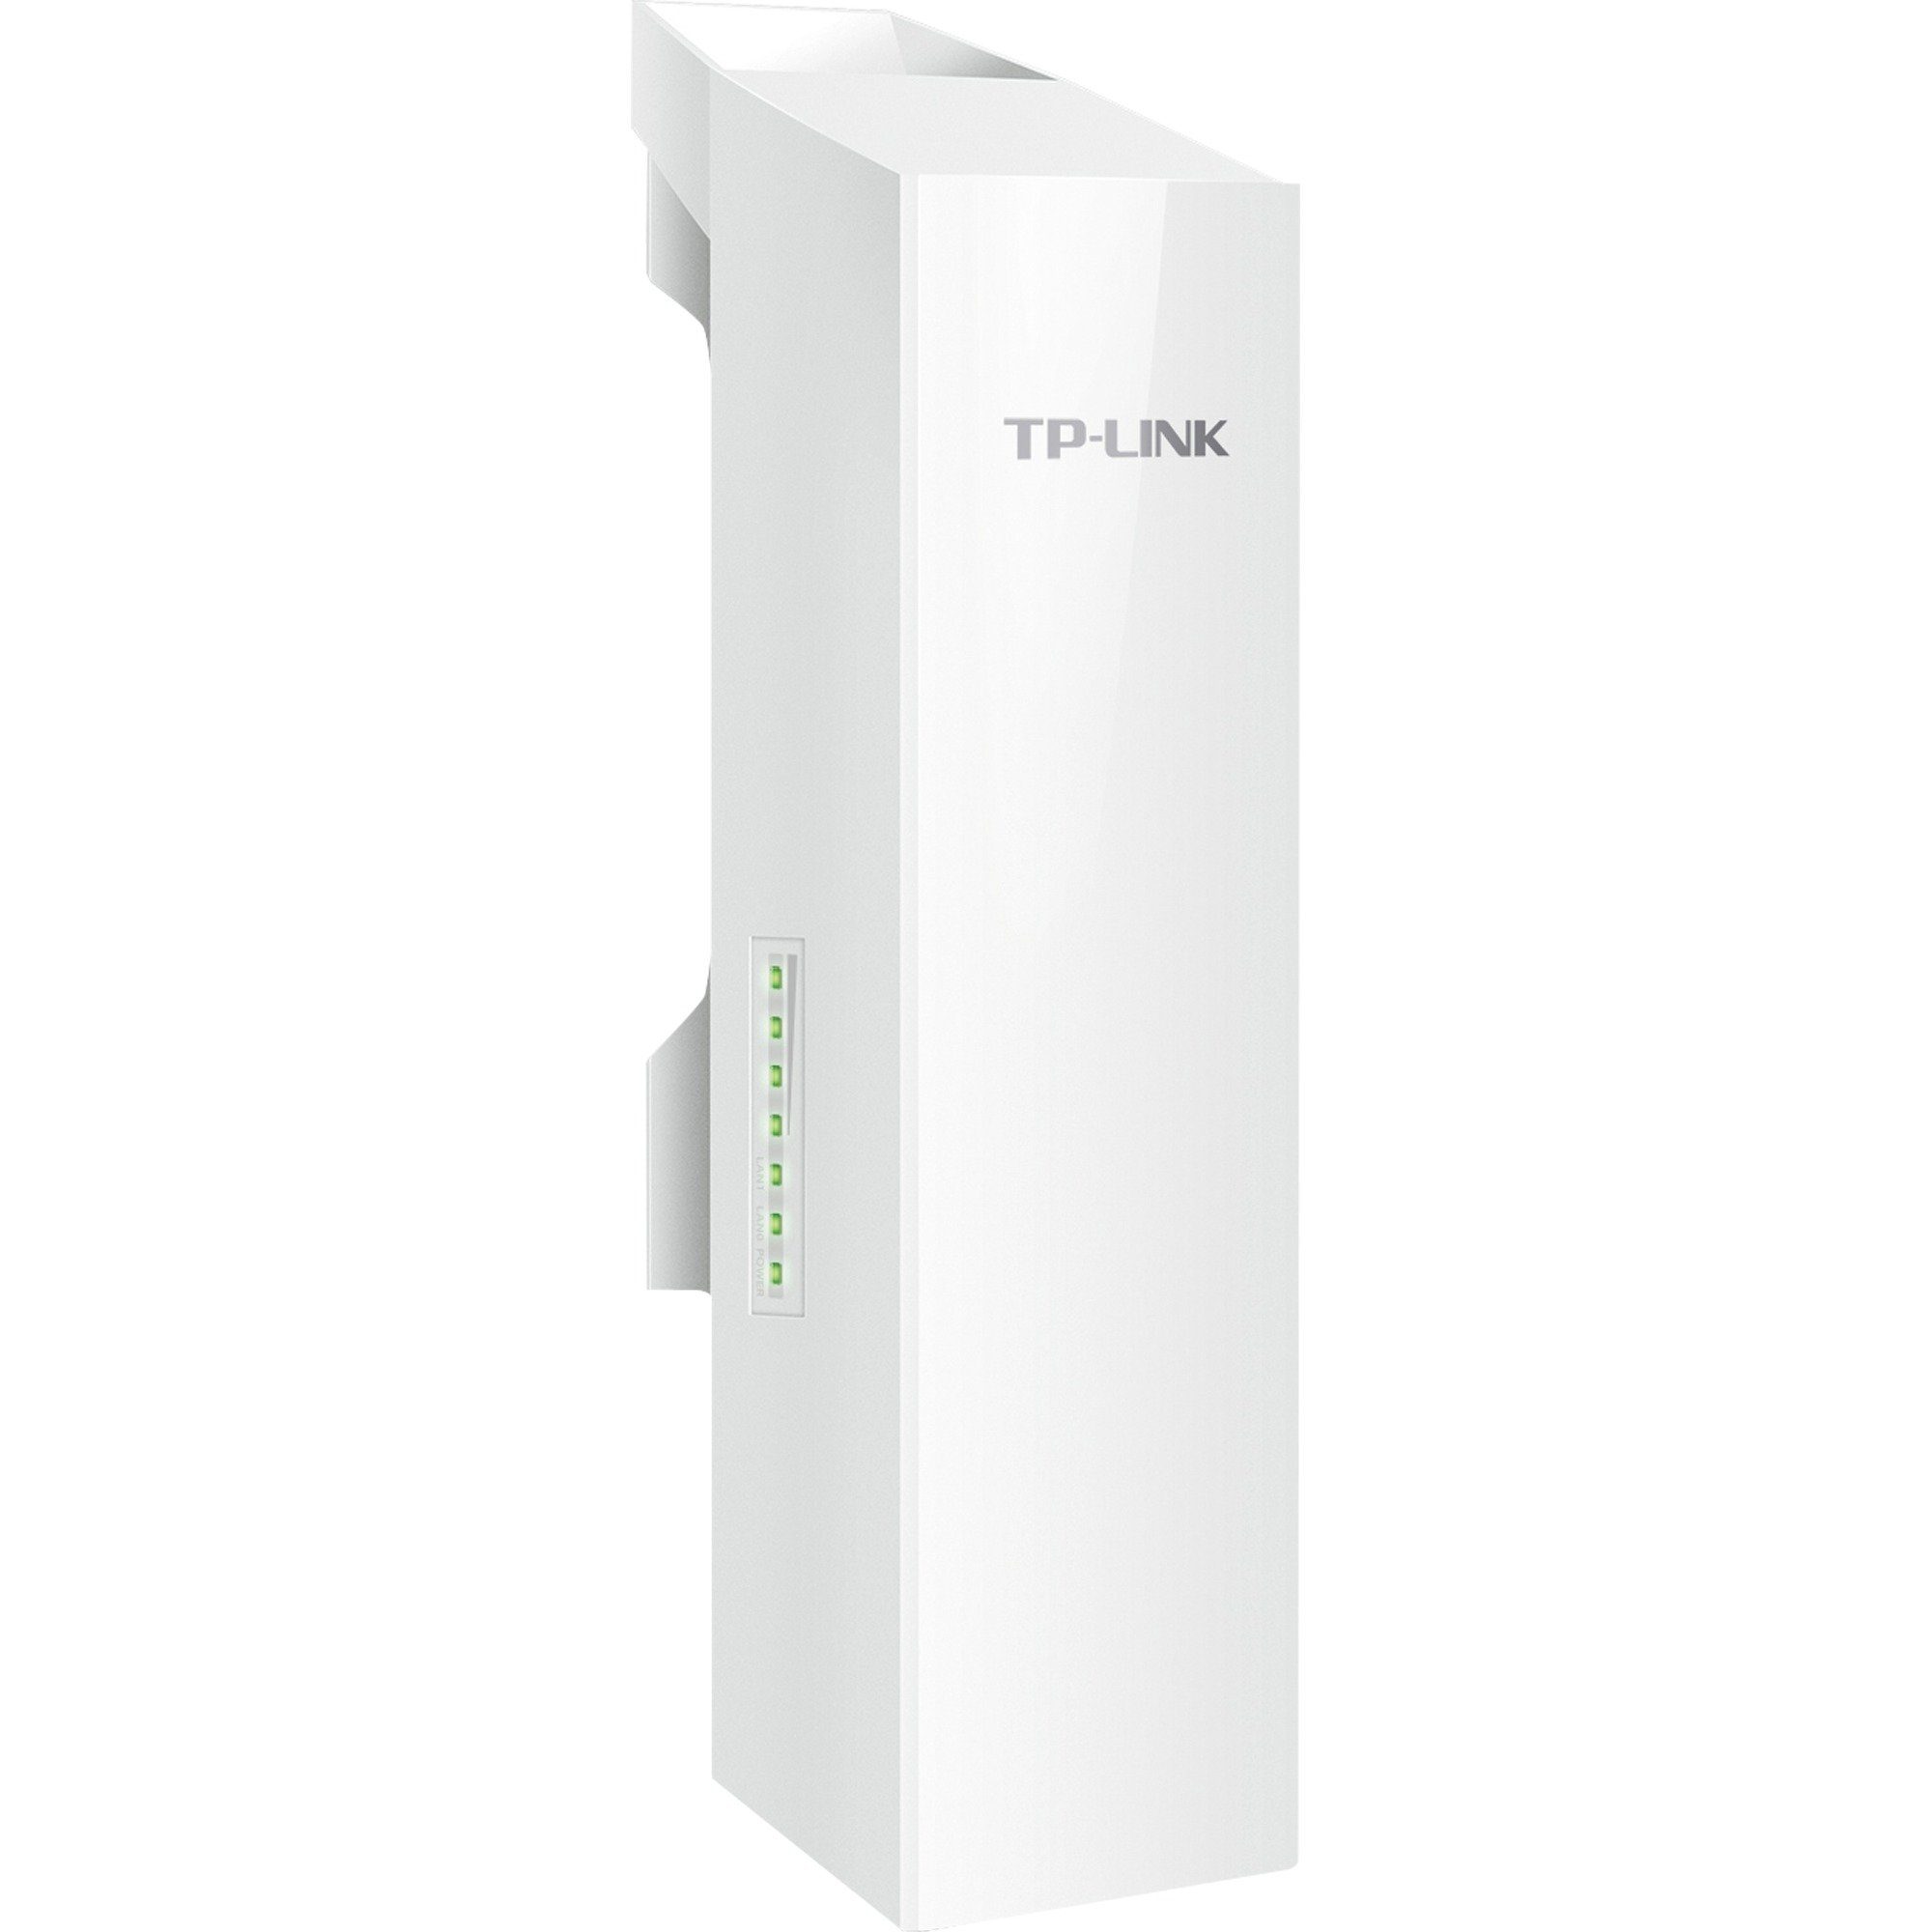 Point WLAN-Repeater TP-Link TP-Link CPE510, Access